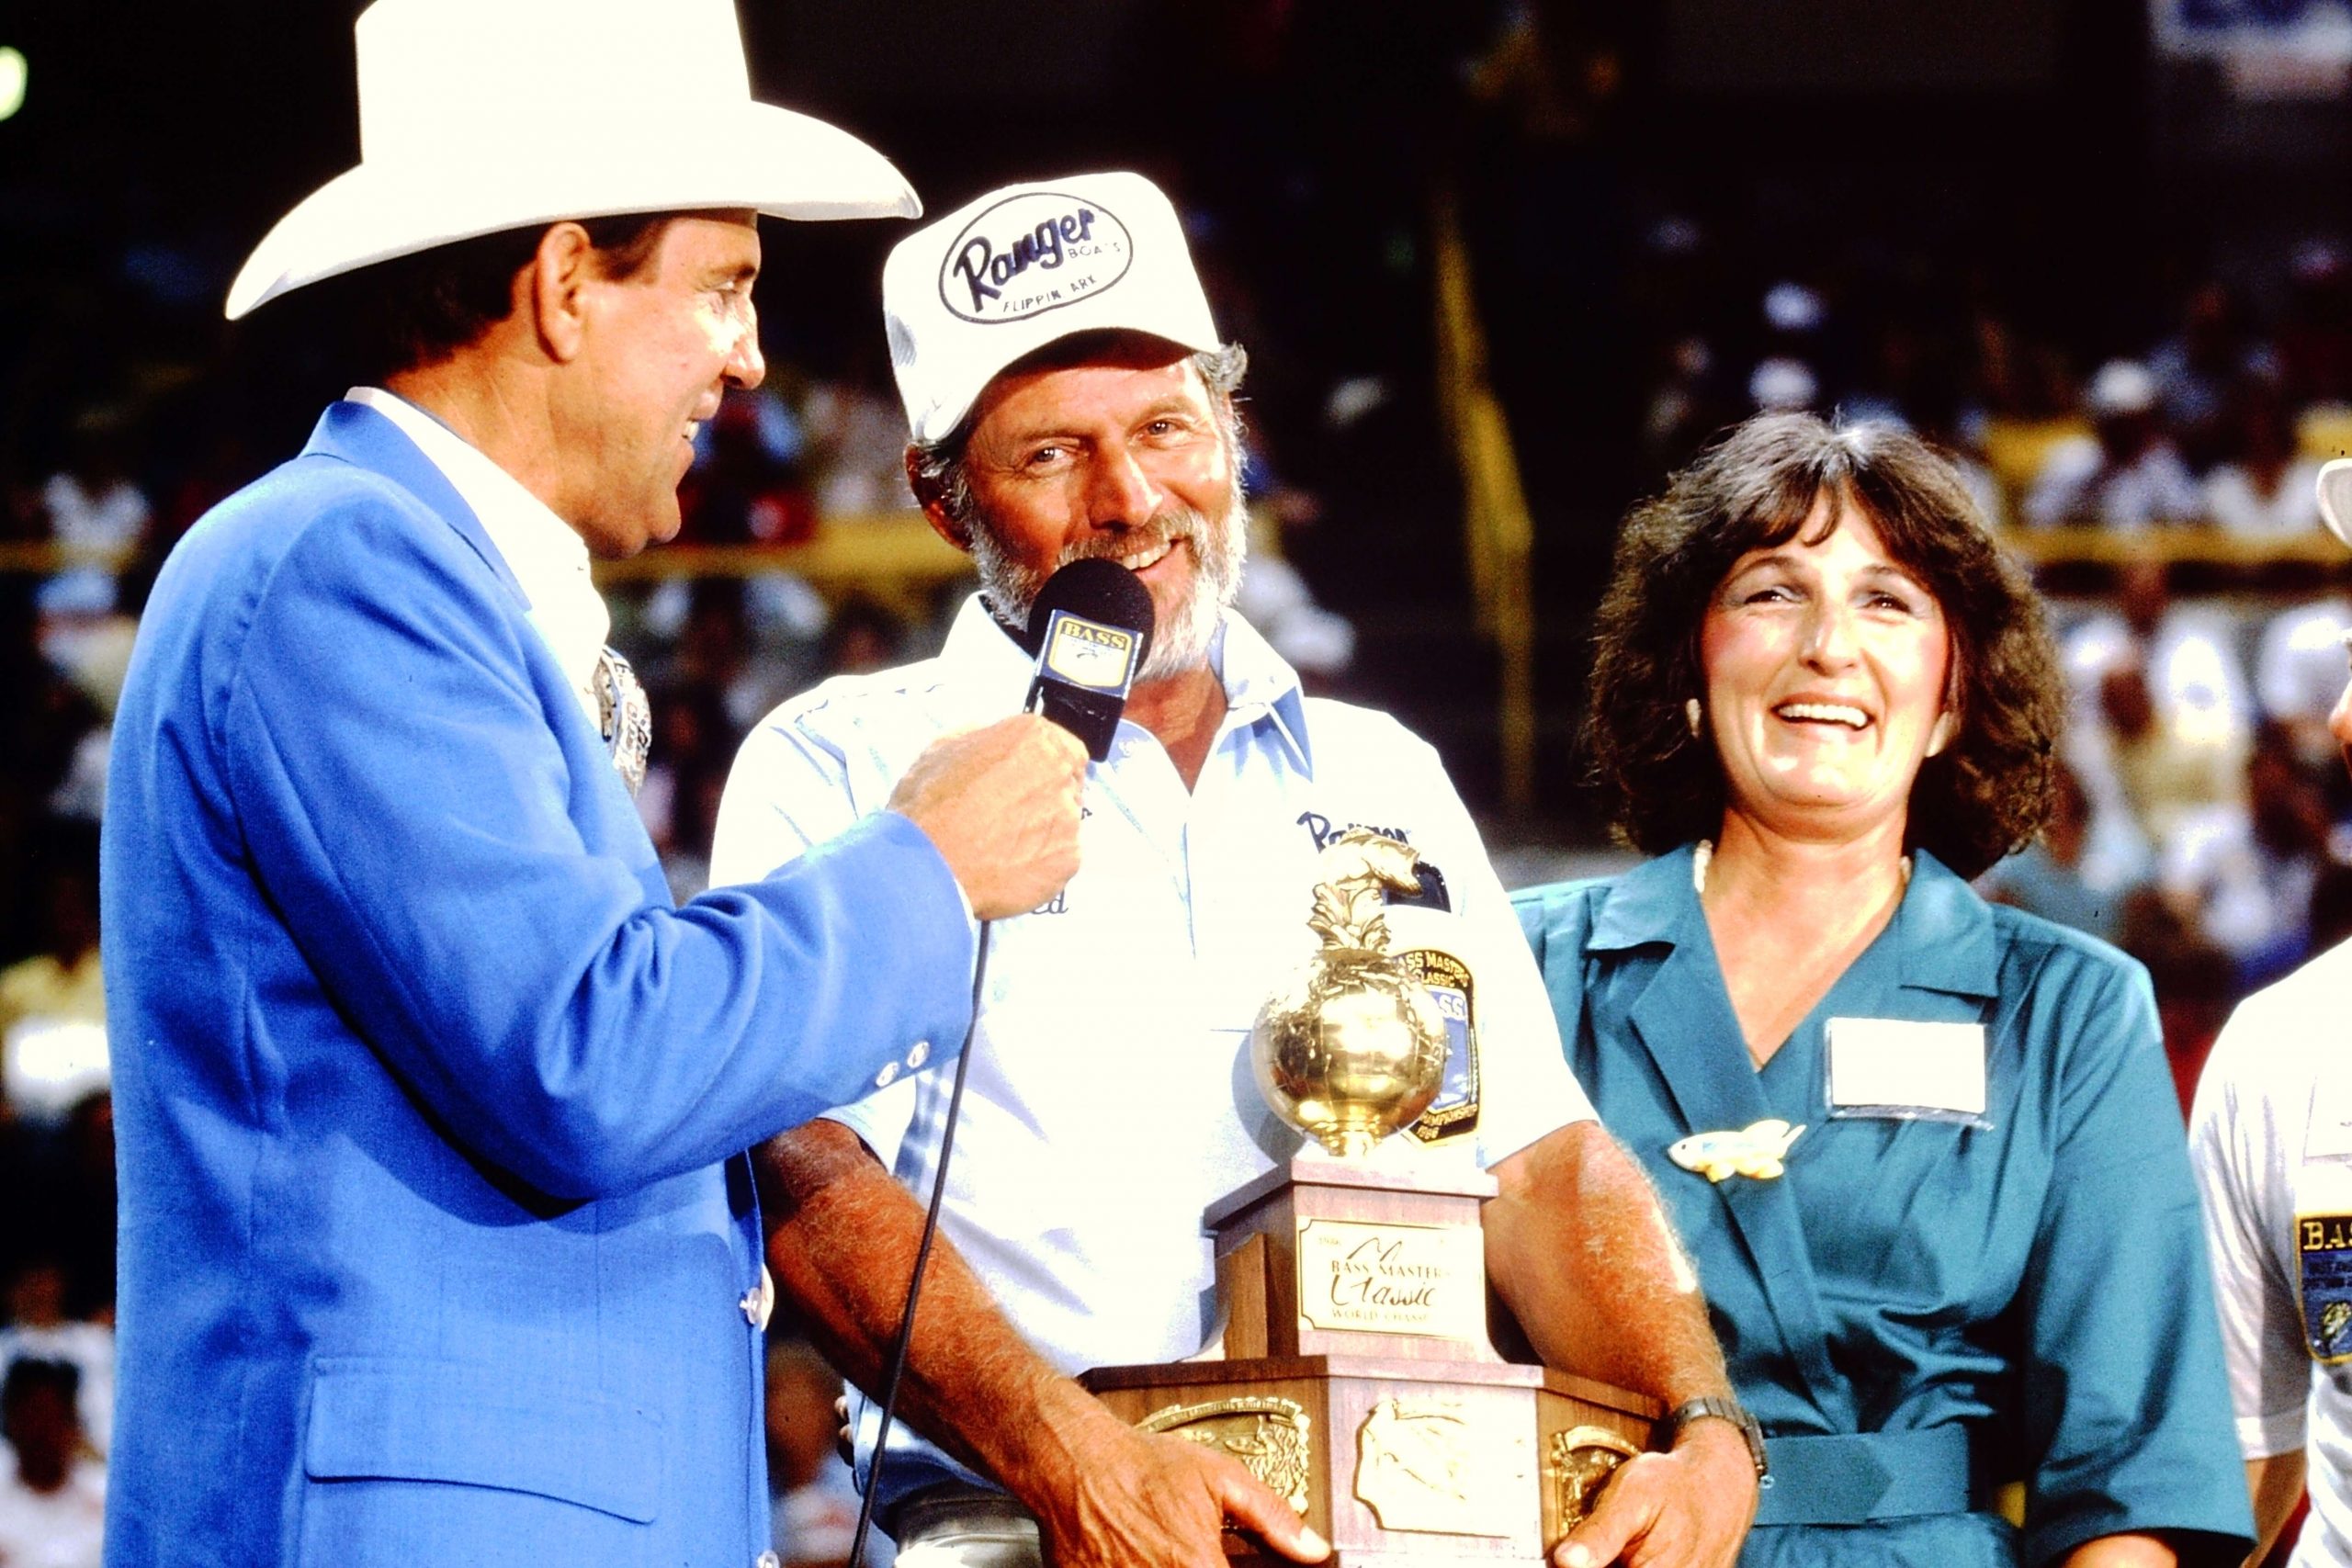 After leaving Chickamauga and Nickajack in June, it didnât take B.A.S.S. long to get back there. The fisheries were the site of the 1986 Bassmaster Classic, Aug. 14-16. Charlie Reed of Broken Bow, Okla., won the title. Standing next to him is his wife, Vojai, who went down in bass fishing history five years later for being the first female competitor in a B.A.S.S. event. Charlie Reed fished with B.A.S.S. for 10 more years, but he never won another tournament. He died in July 2013 at age 78.